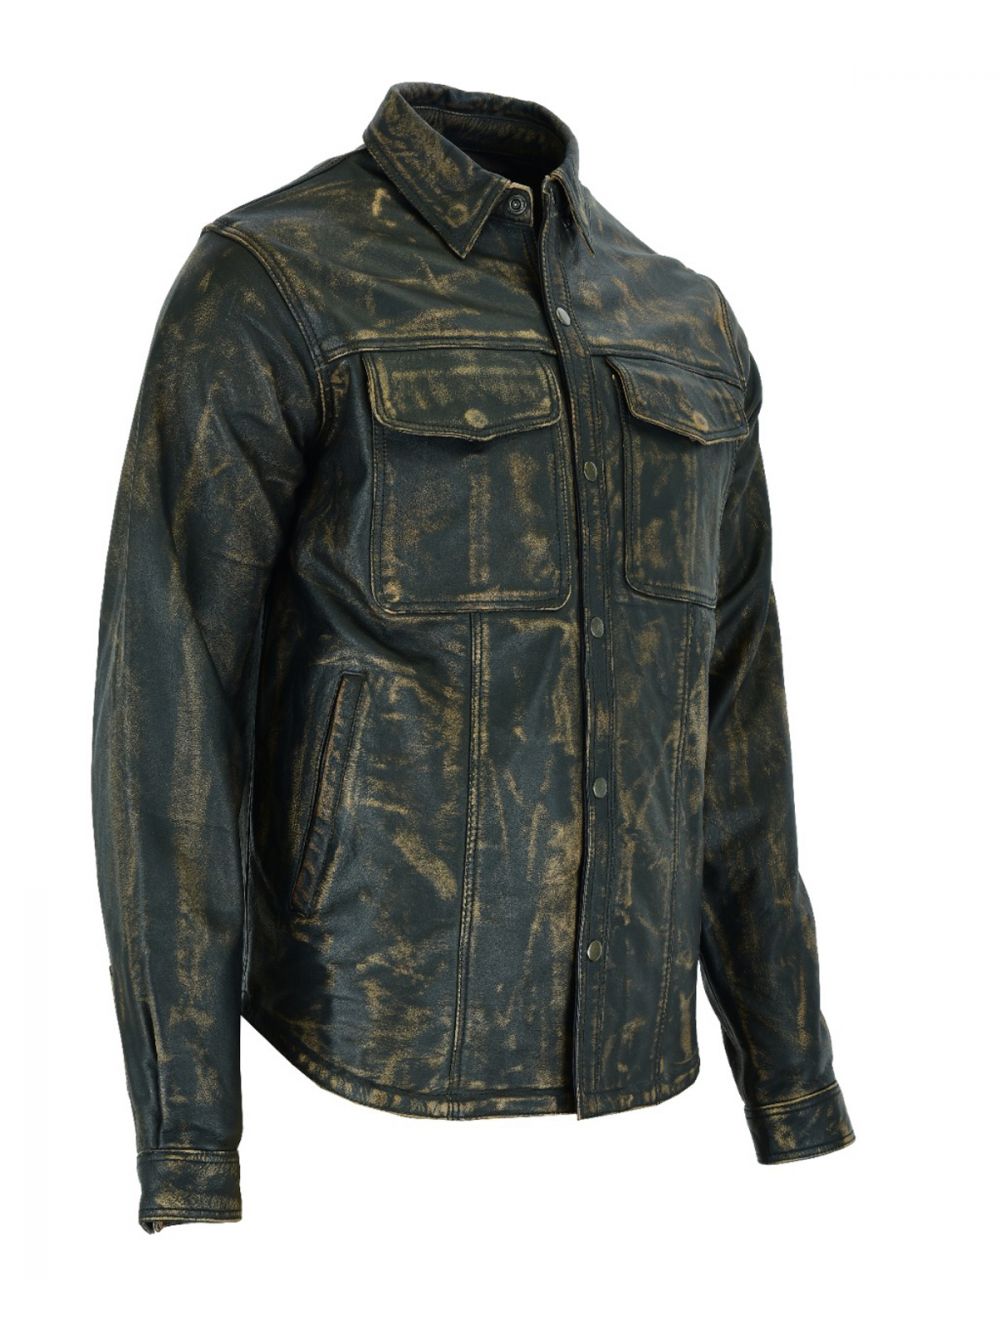 Mens Distressed Brown Leather Motorcycle Shirt with Concealed Carry